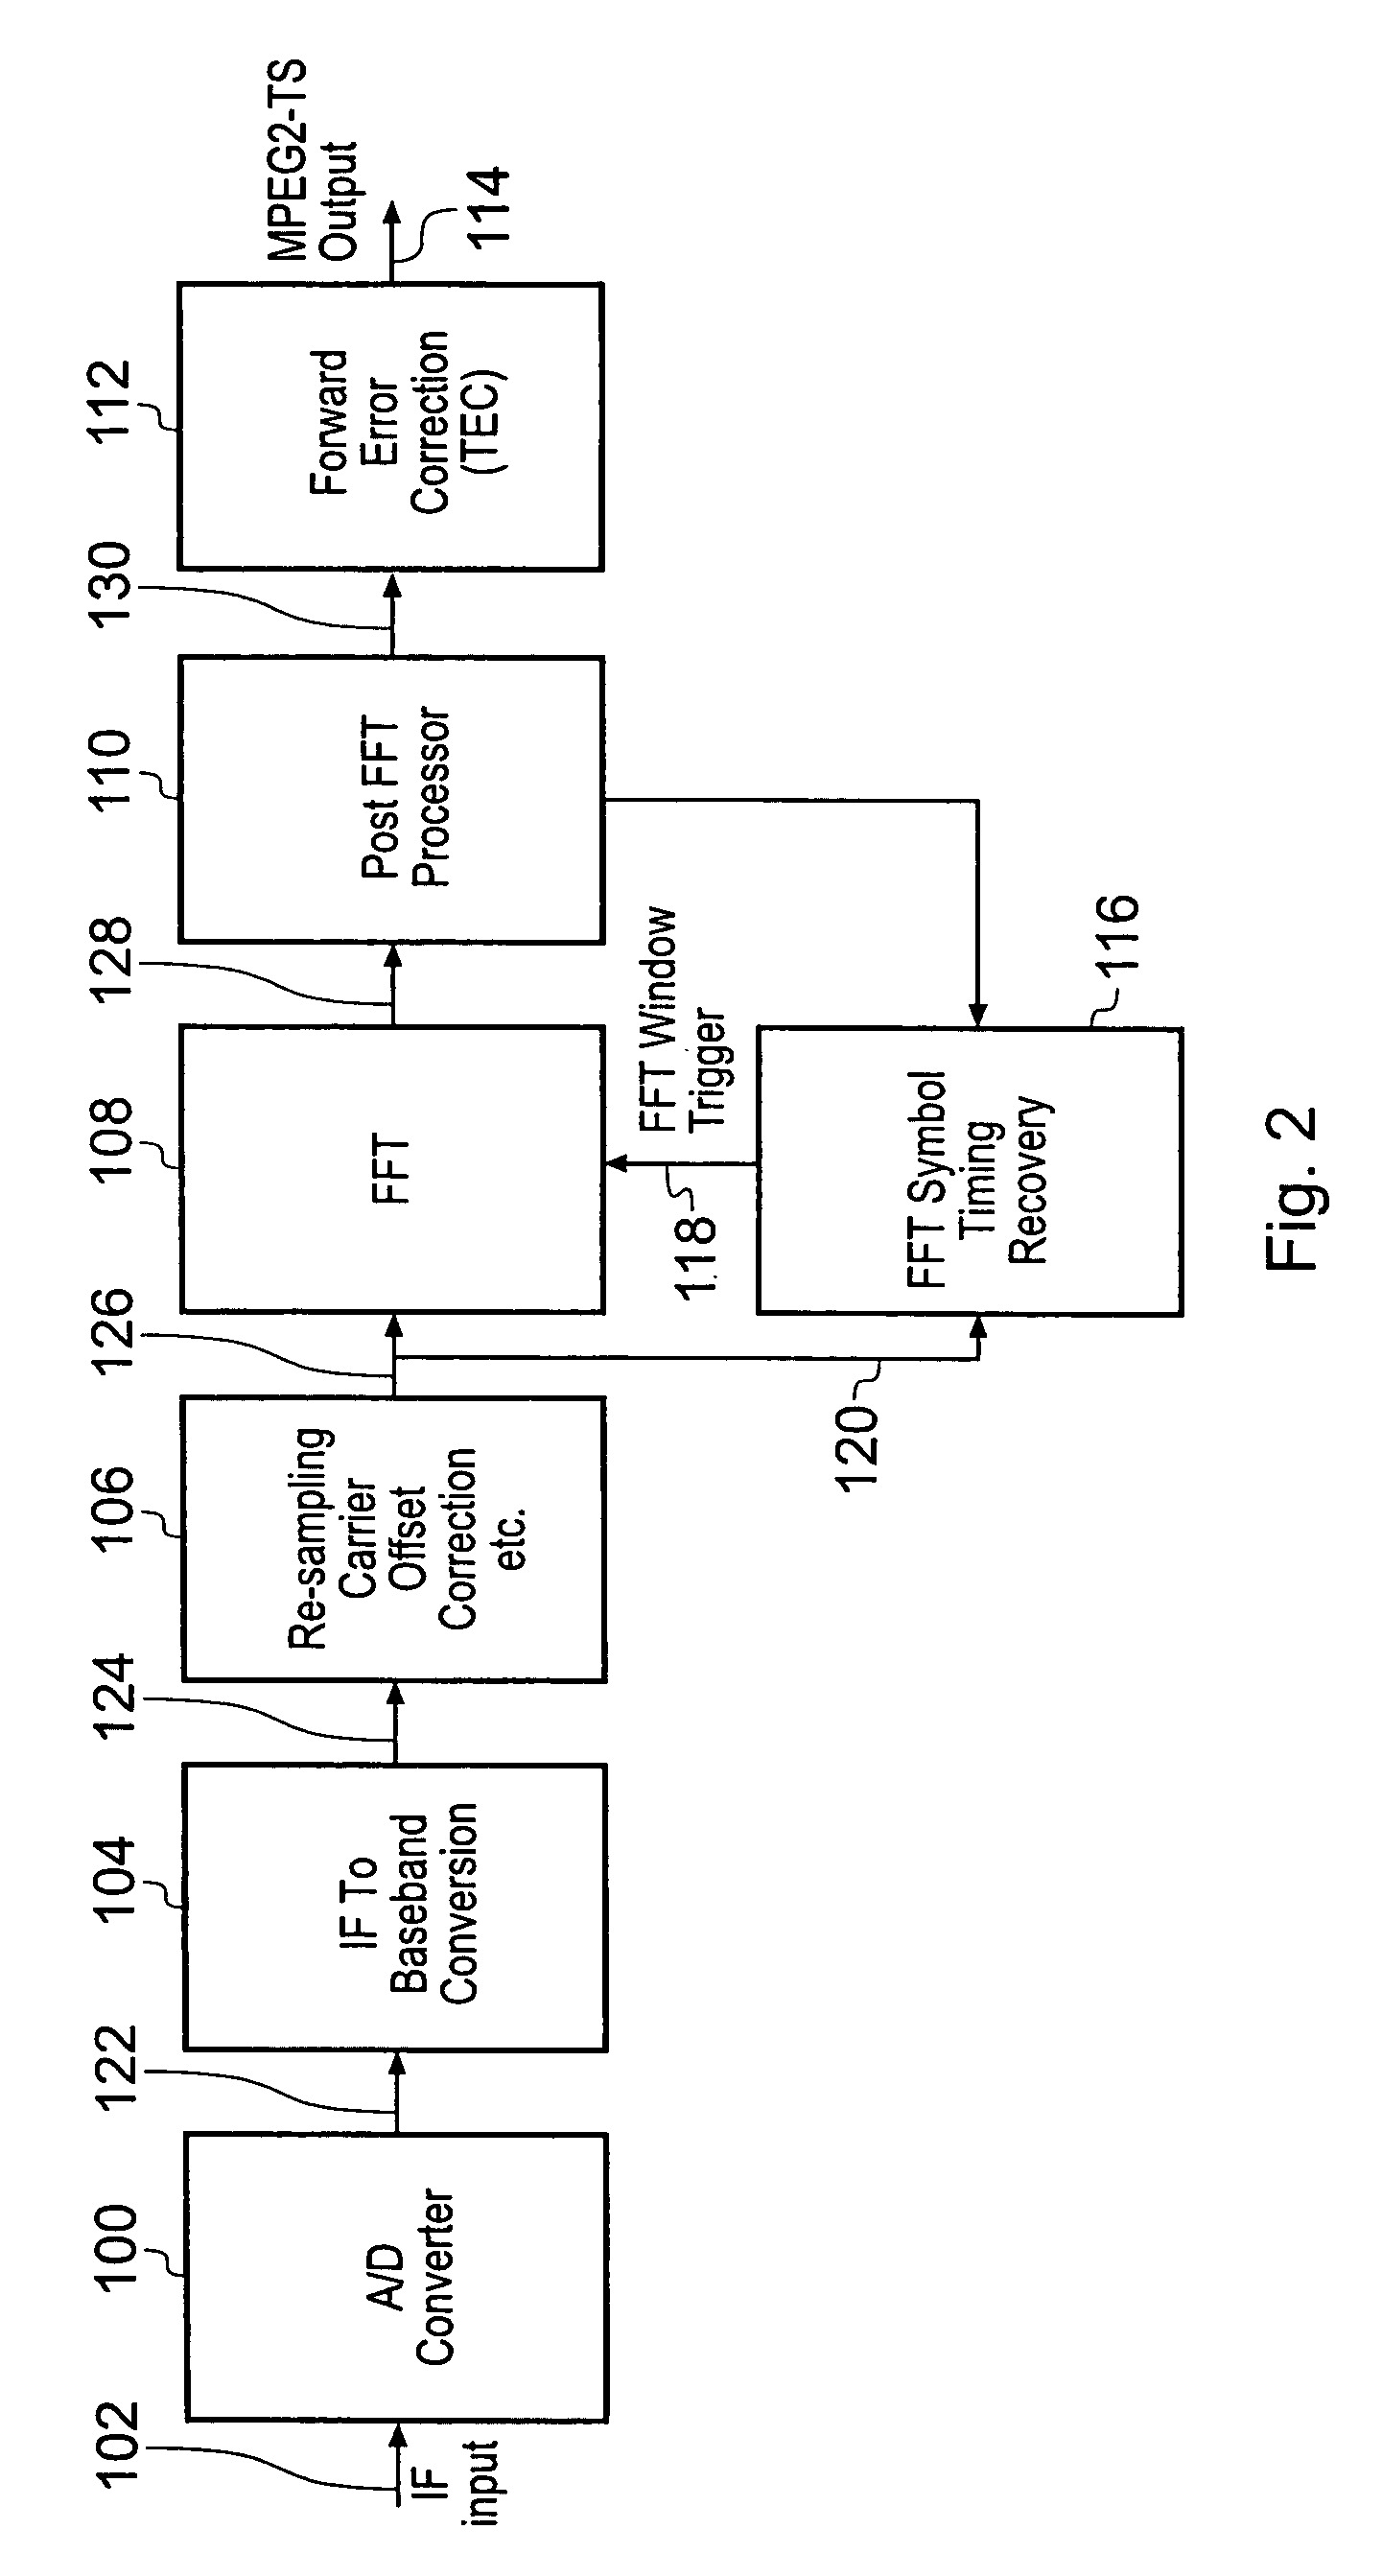 Receiver for recovering data from an OFDM symbol